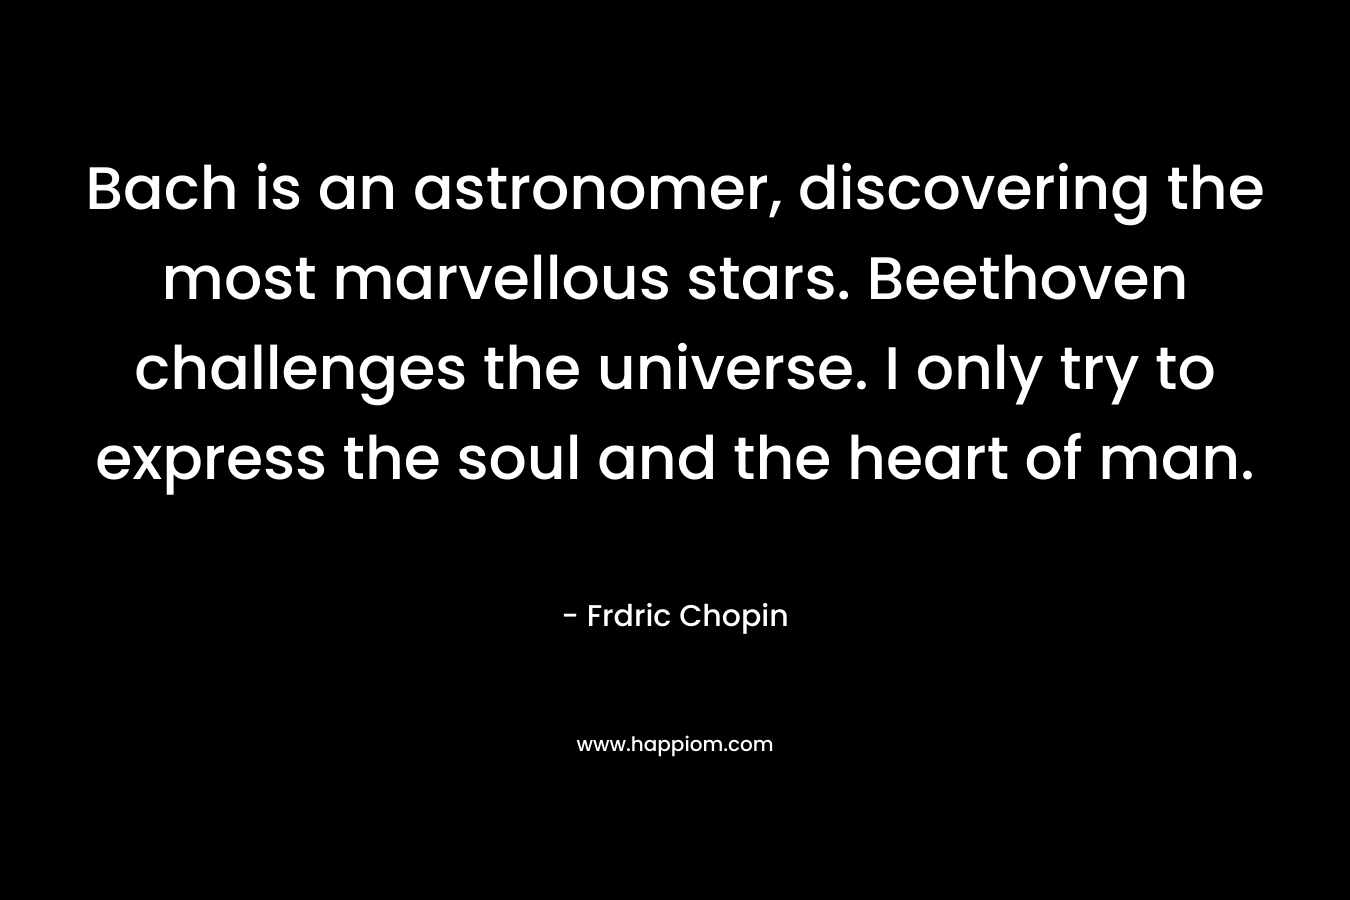 Bach is an astronomer, discovering the most marvellous stars. Beethoven challenges the universe. I only try to express the soul and the heart of man. – Frdric Chopin